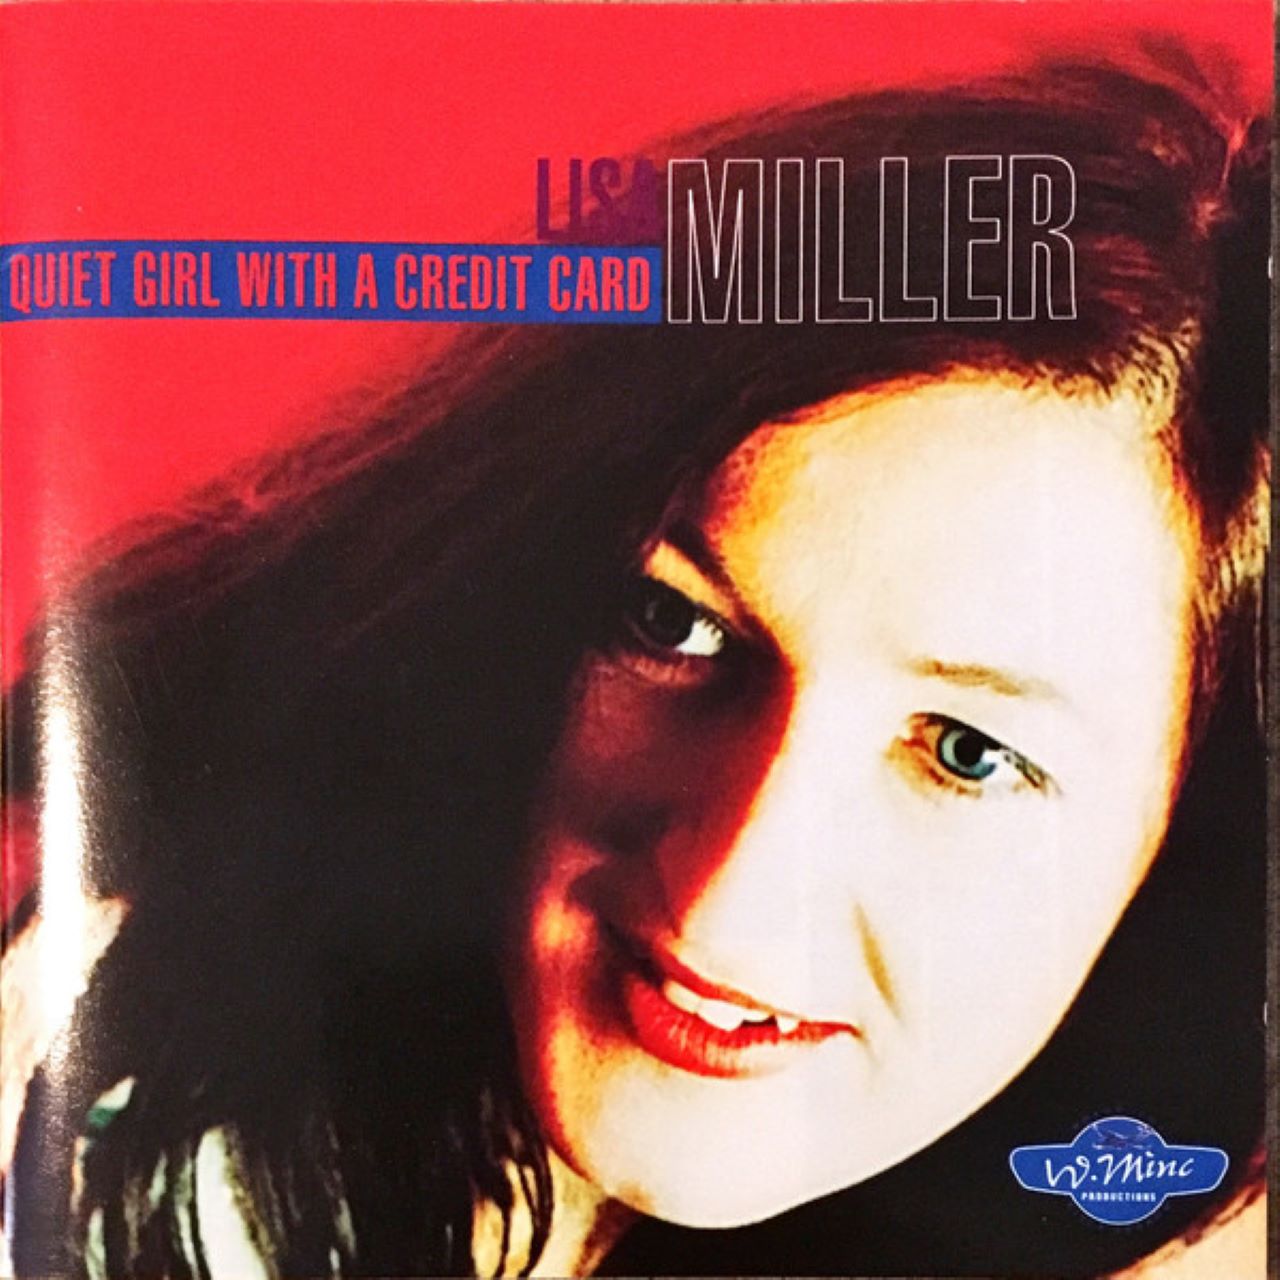 Lisa Miller - Quiet Girl With A Credit Card cover album